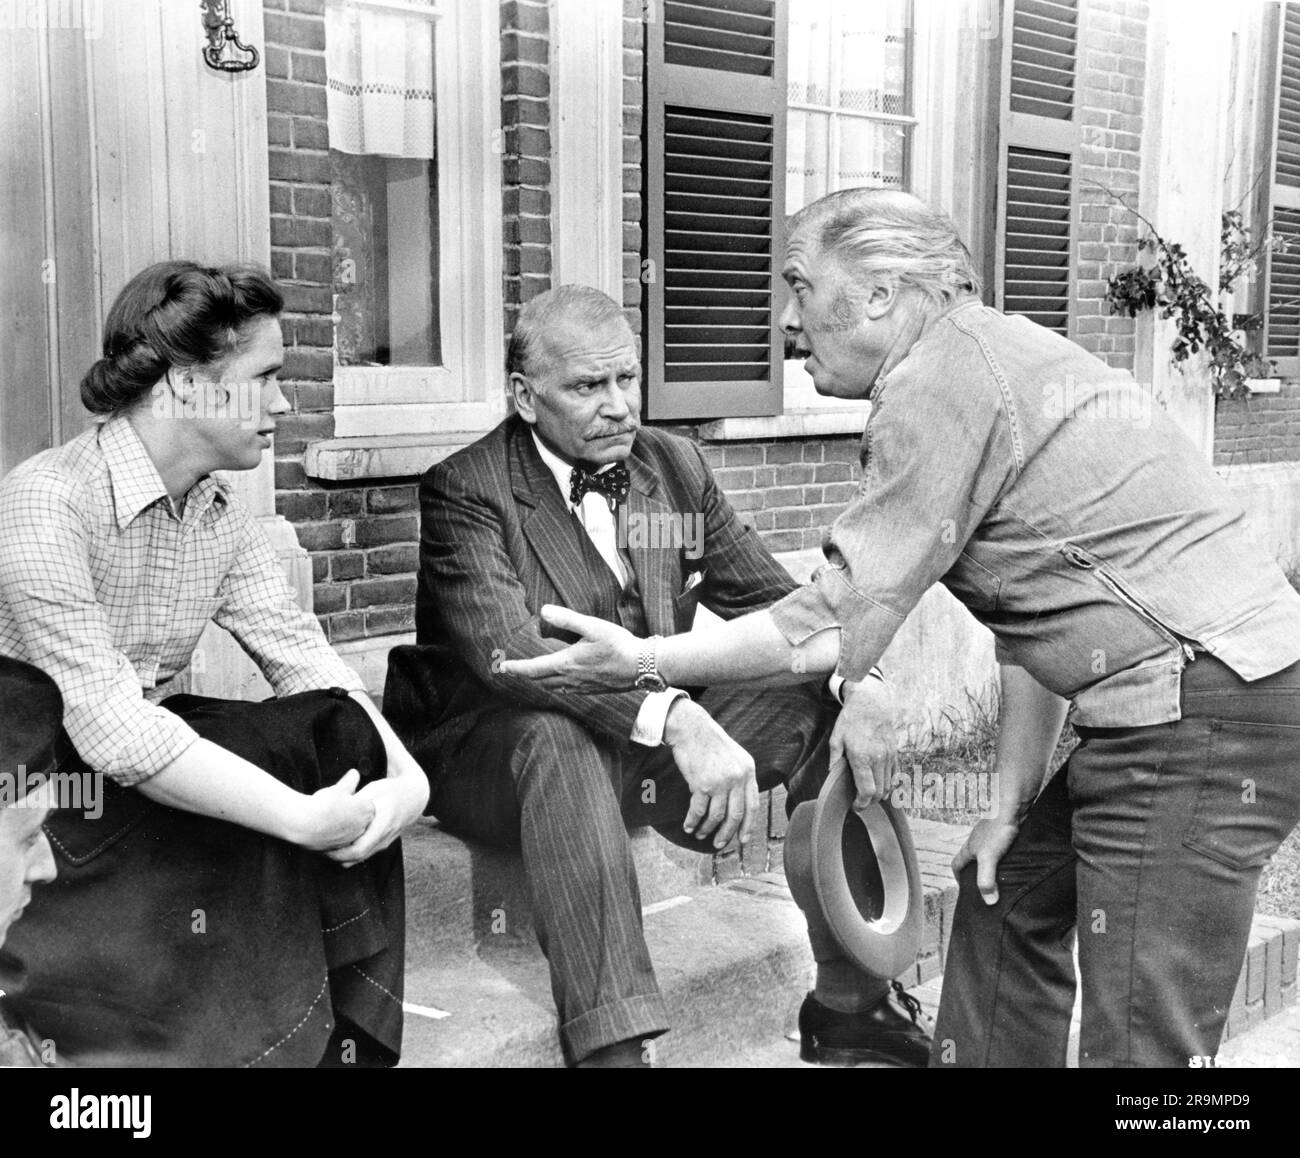 LIV ULLMANN LAURENCE OLIVIER and Director RICHARD ATTENBOROUGH on set candid during filming of A BRIDGE TOO FAR 1977 director RICHARD ATTENBOROUGH screenplay William Goldman based on the book by Cornelius Ryan USA-UK co-production Joseph E. Levine Productions / United Artists Stock Photo